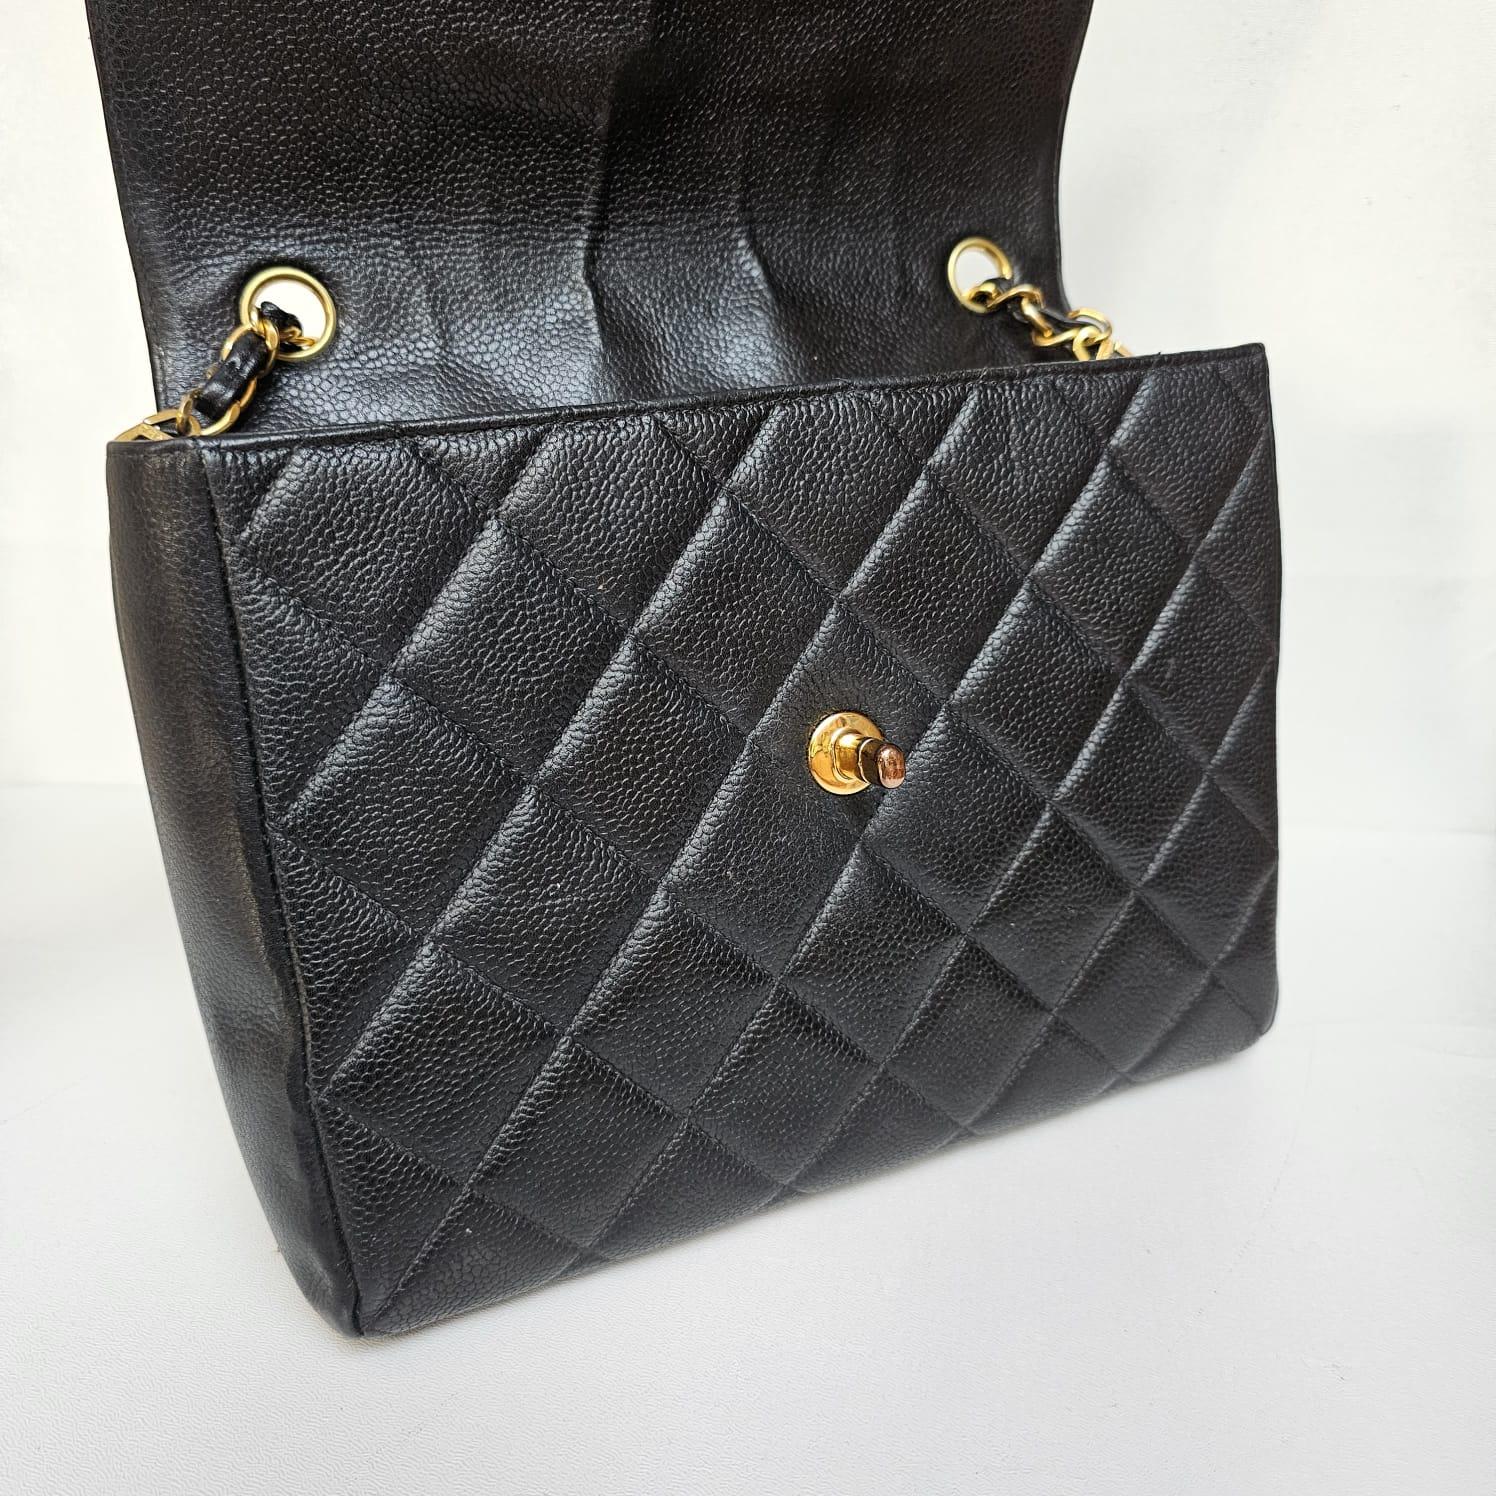 Rare vintage square flap bag in black caviar leather. Beautiful vintage condition. Series #4. Minor wrinkling on the leather flap. Comes with holo and dust bag only.